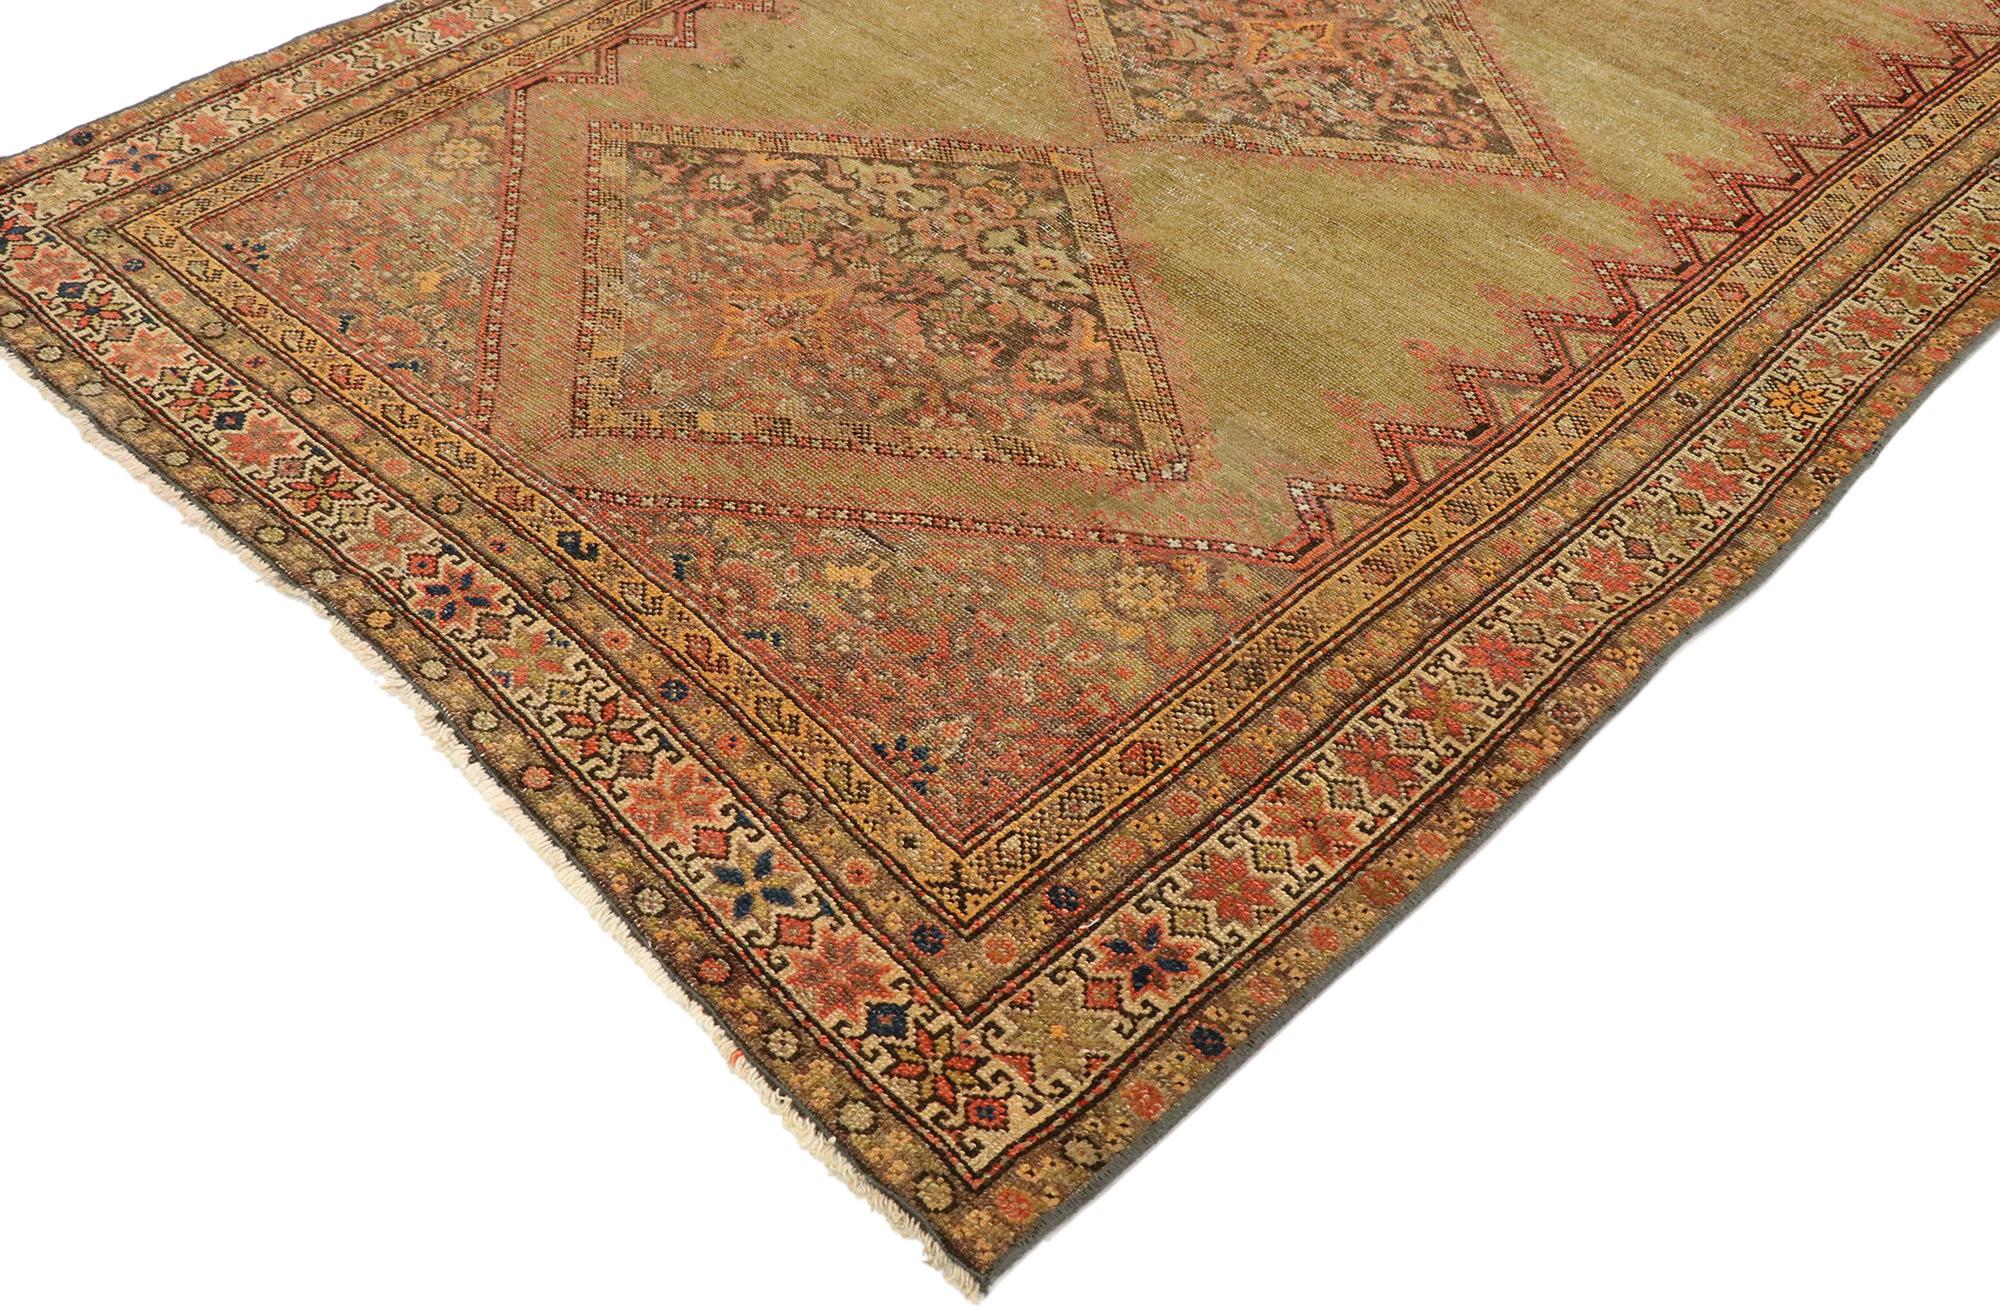 53062 antique Persian Malayer runner with rustic Mediterranean style 04'01 x 09'01. This hand knotted wool and camel hair antique Persian Malayer runner features five diamond-shaped medallions spread across an abrashed camel colored field. The